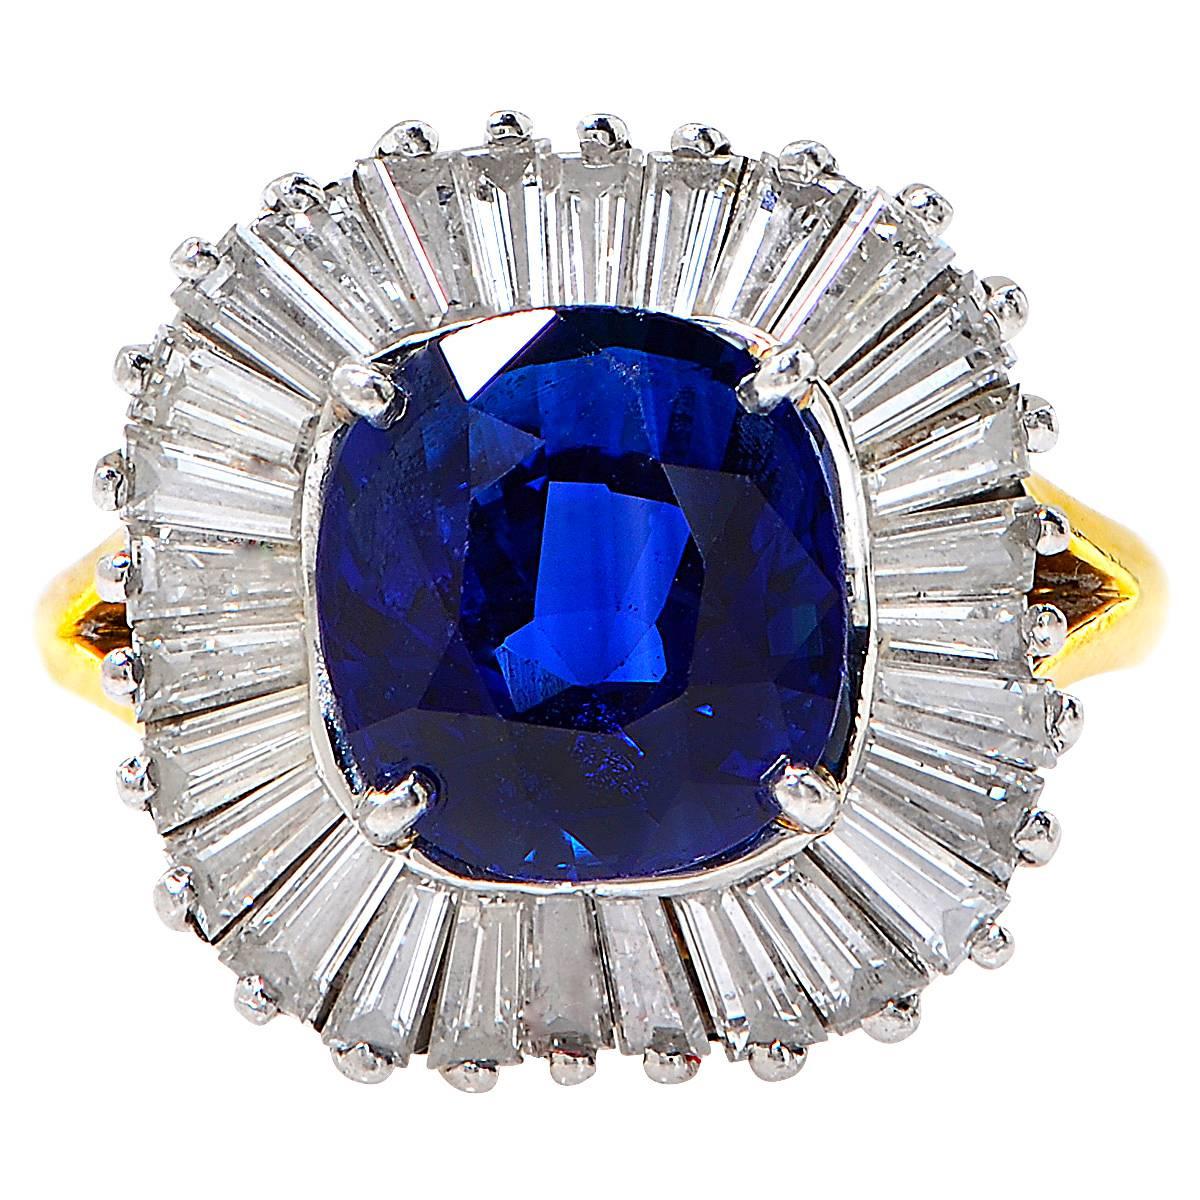 This Gorgeous Cushion Cut Sapphire Weighing 3.43 Carats Surrounded by 28 Tapered Baguettes Weighing Approximately 1.50 Carats, F-G Color, VS Clarity, Set in to an 18 Karat Yellow and White Gold Ring.

Ring Size: 5
Weight: 6.76

This Beautiful